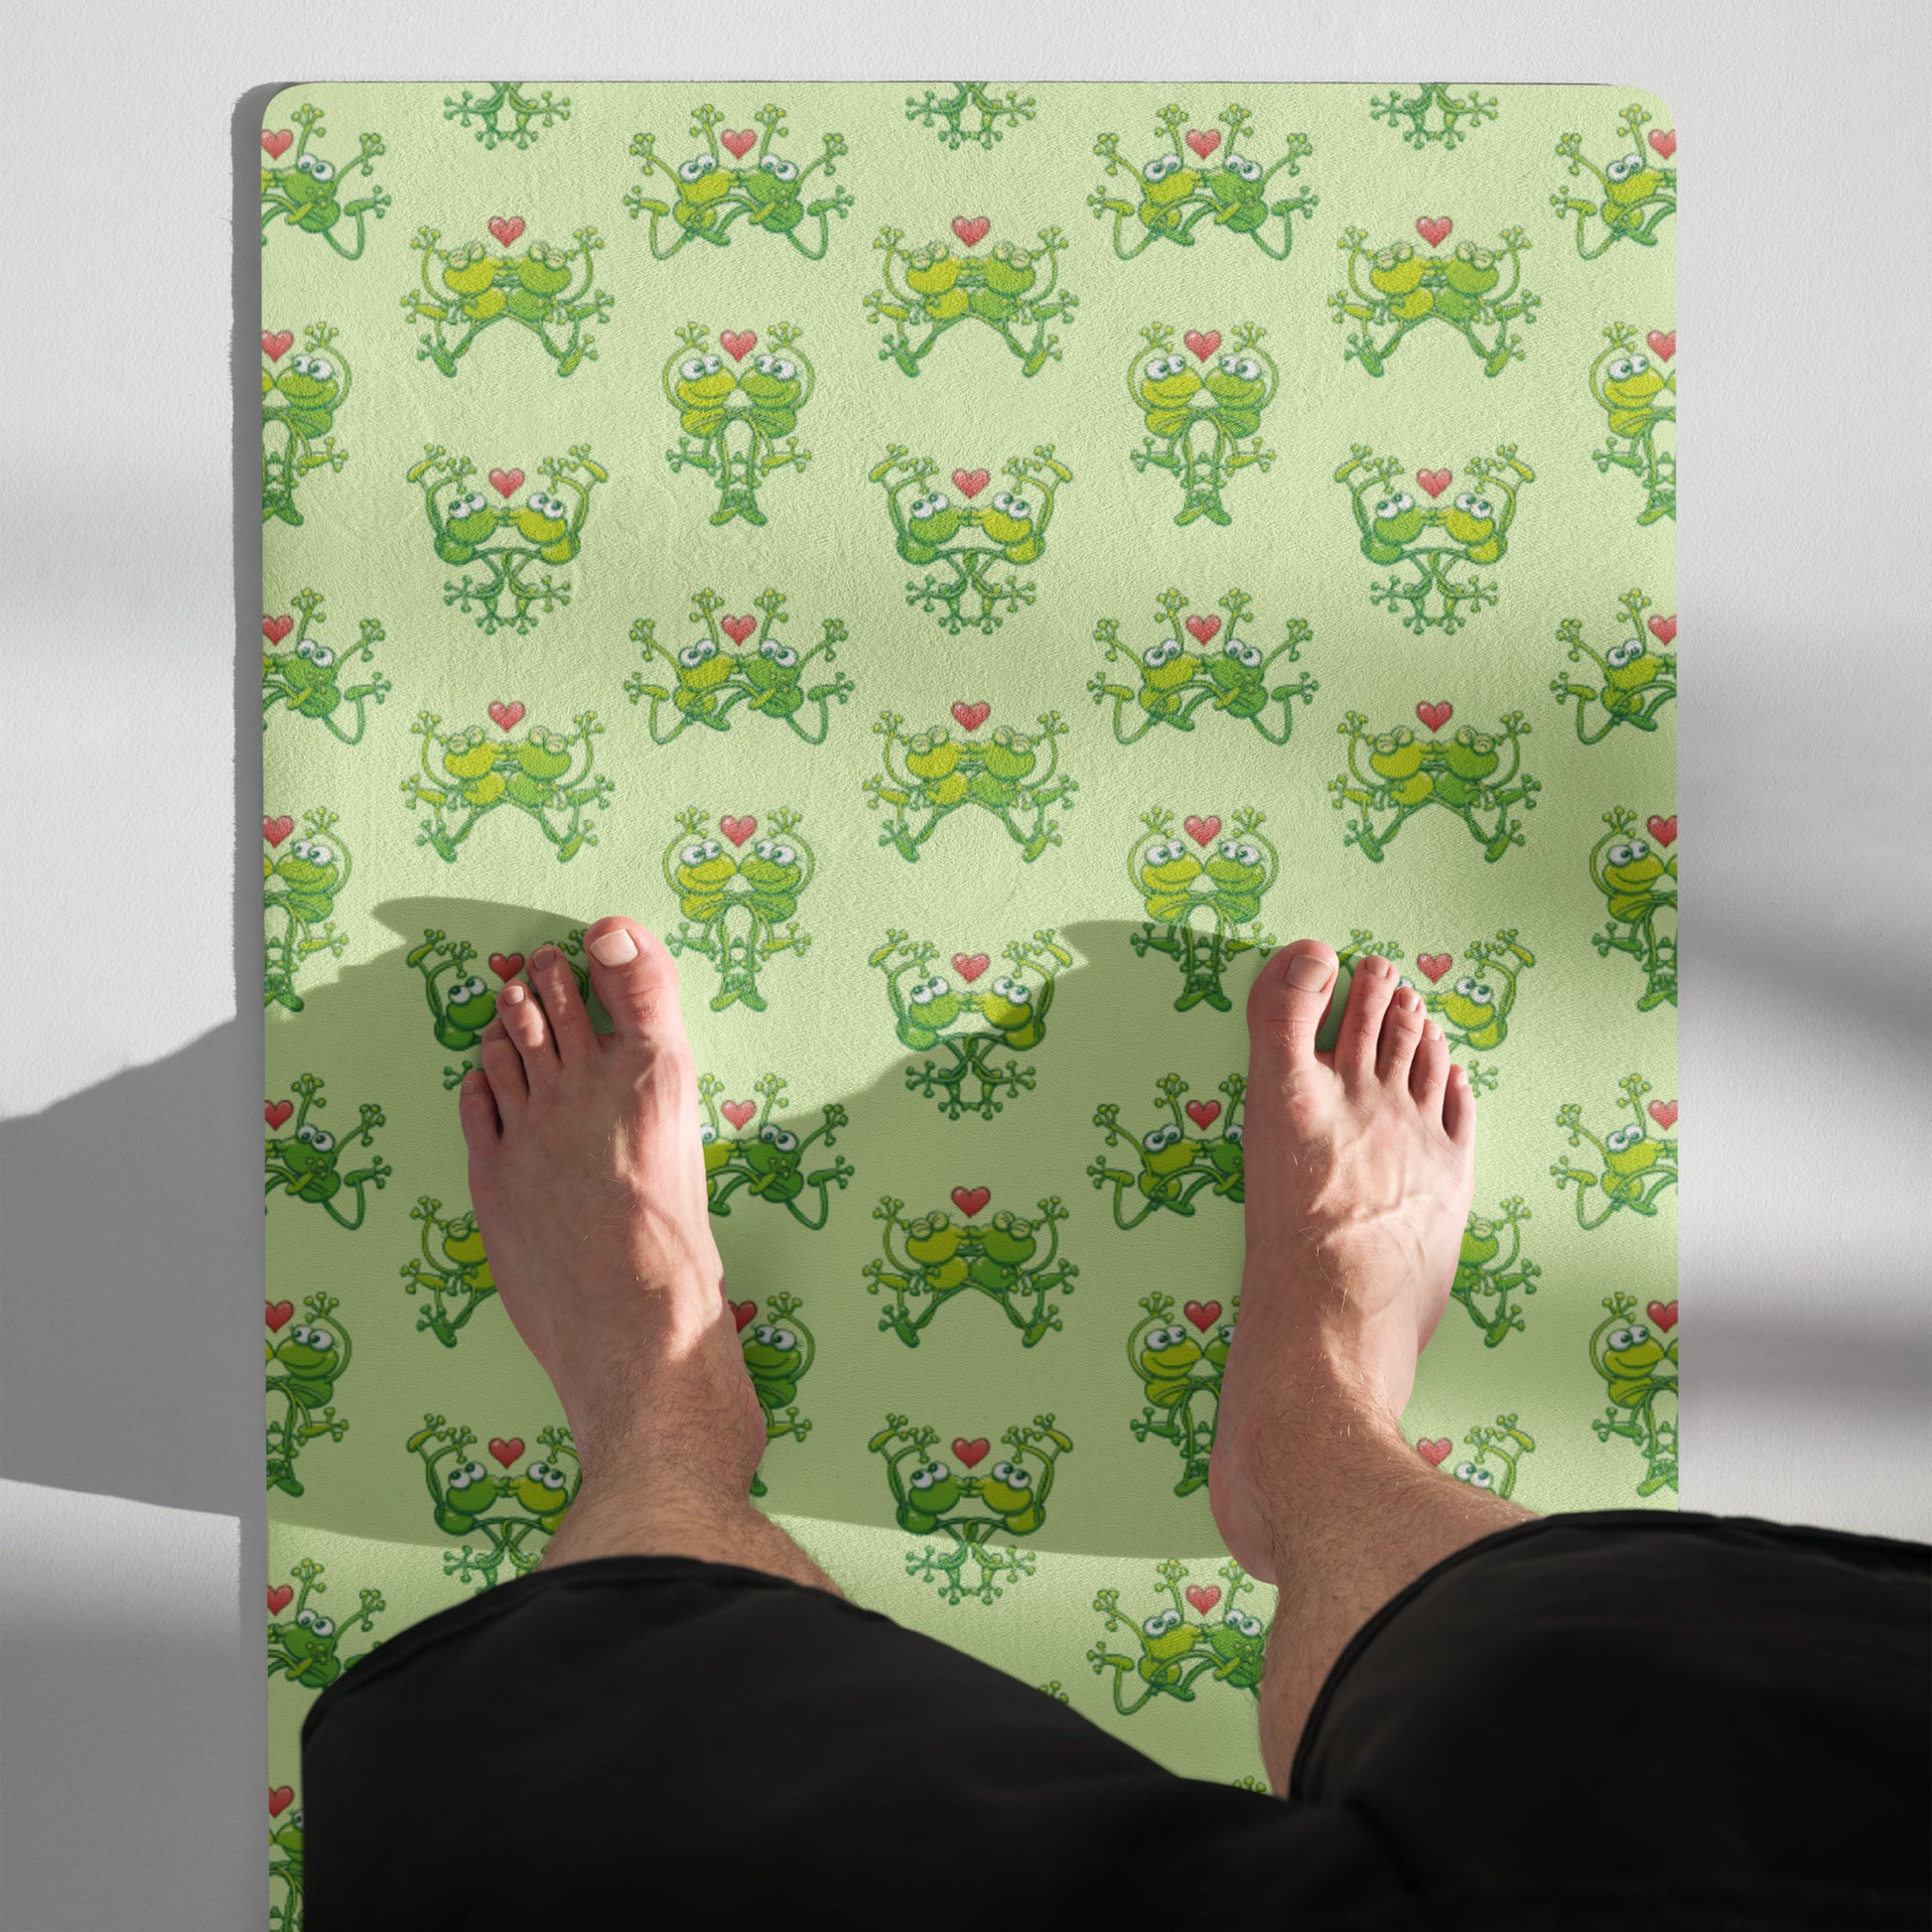 Green frogs are calling for love Yoga mat. Top view